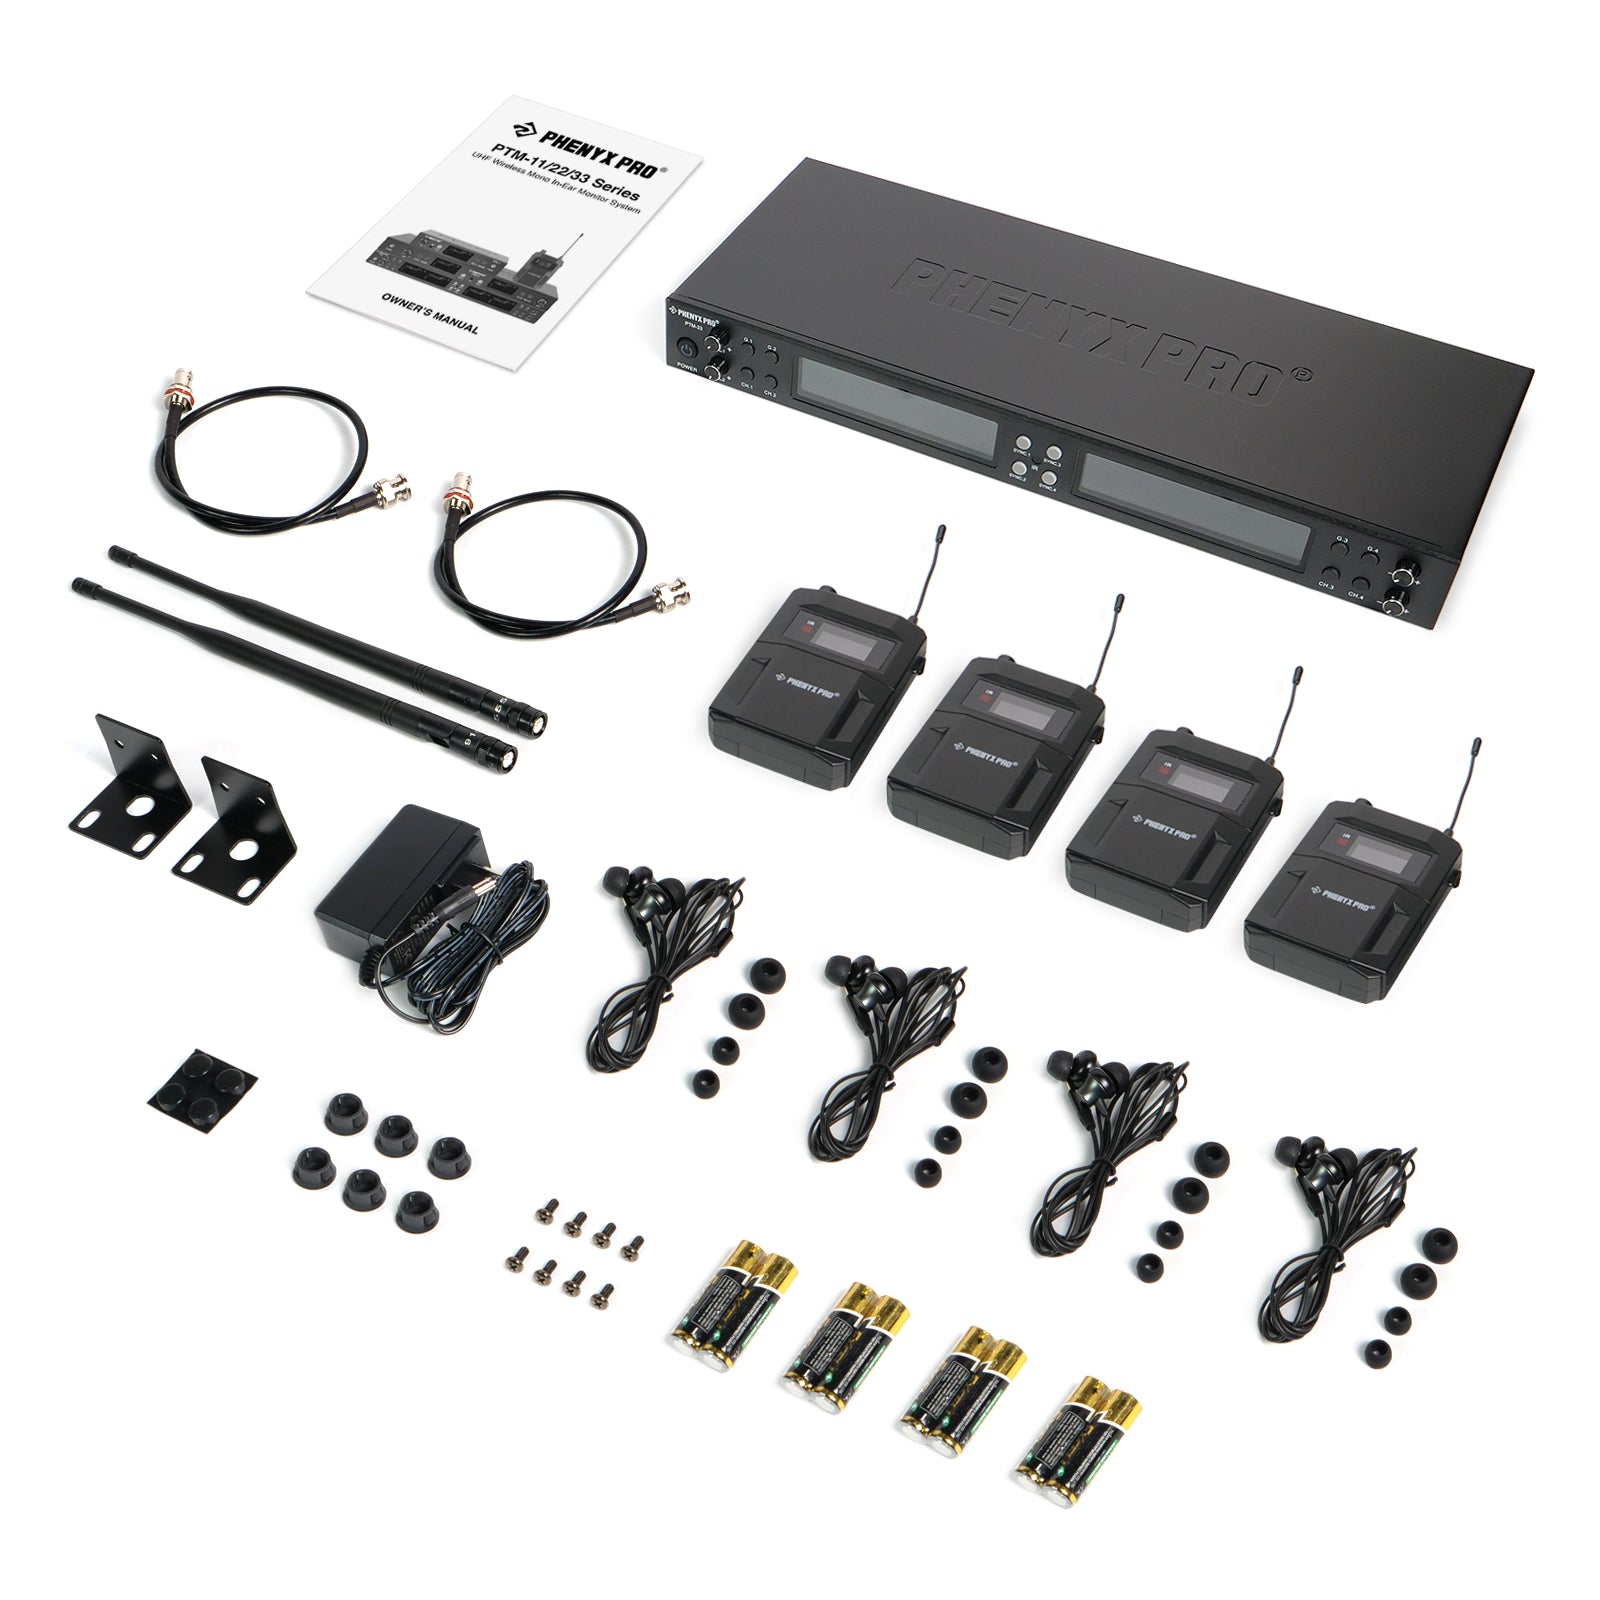 PTM-33 | UHF Mono Wireless In-Ear Monitor System w/ 4 Loop Outputs (4B)